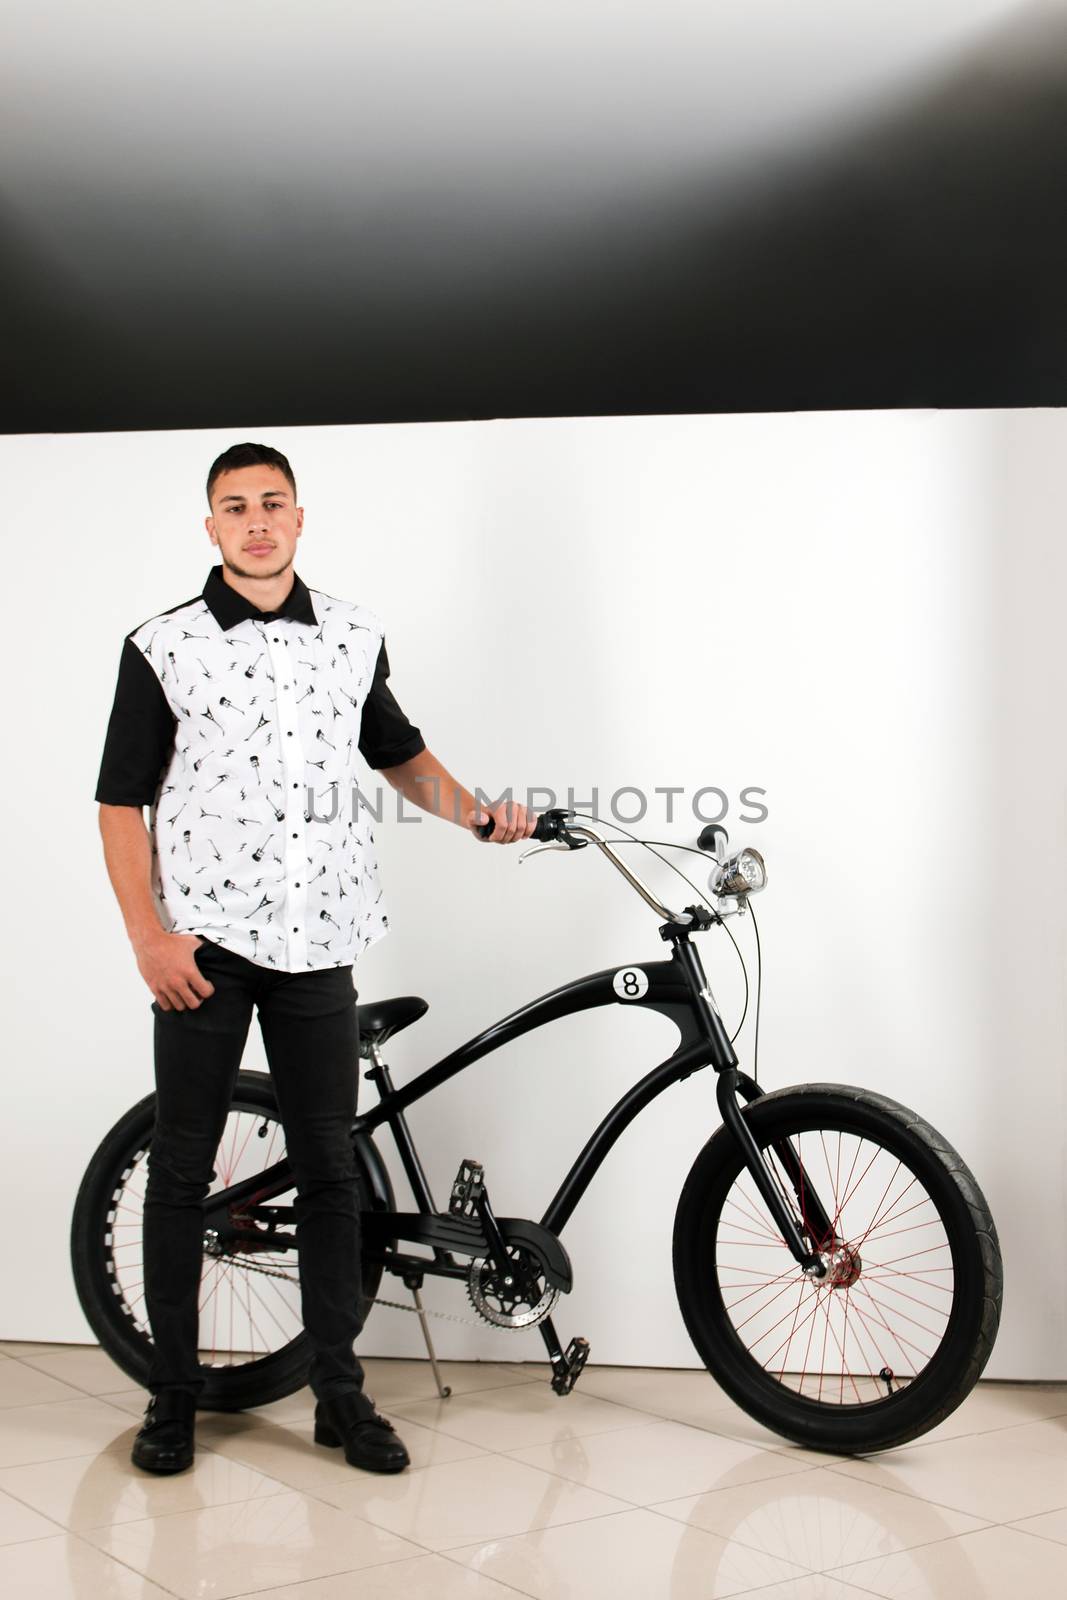 Teenager posing with a vintage style retro clothing and a bike.